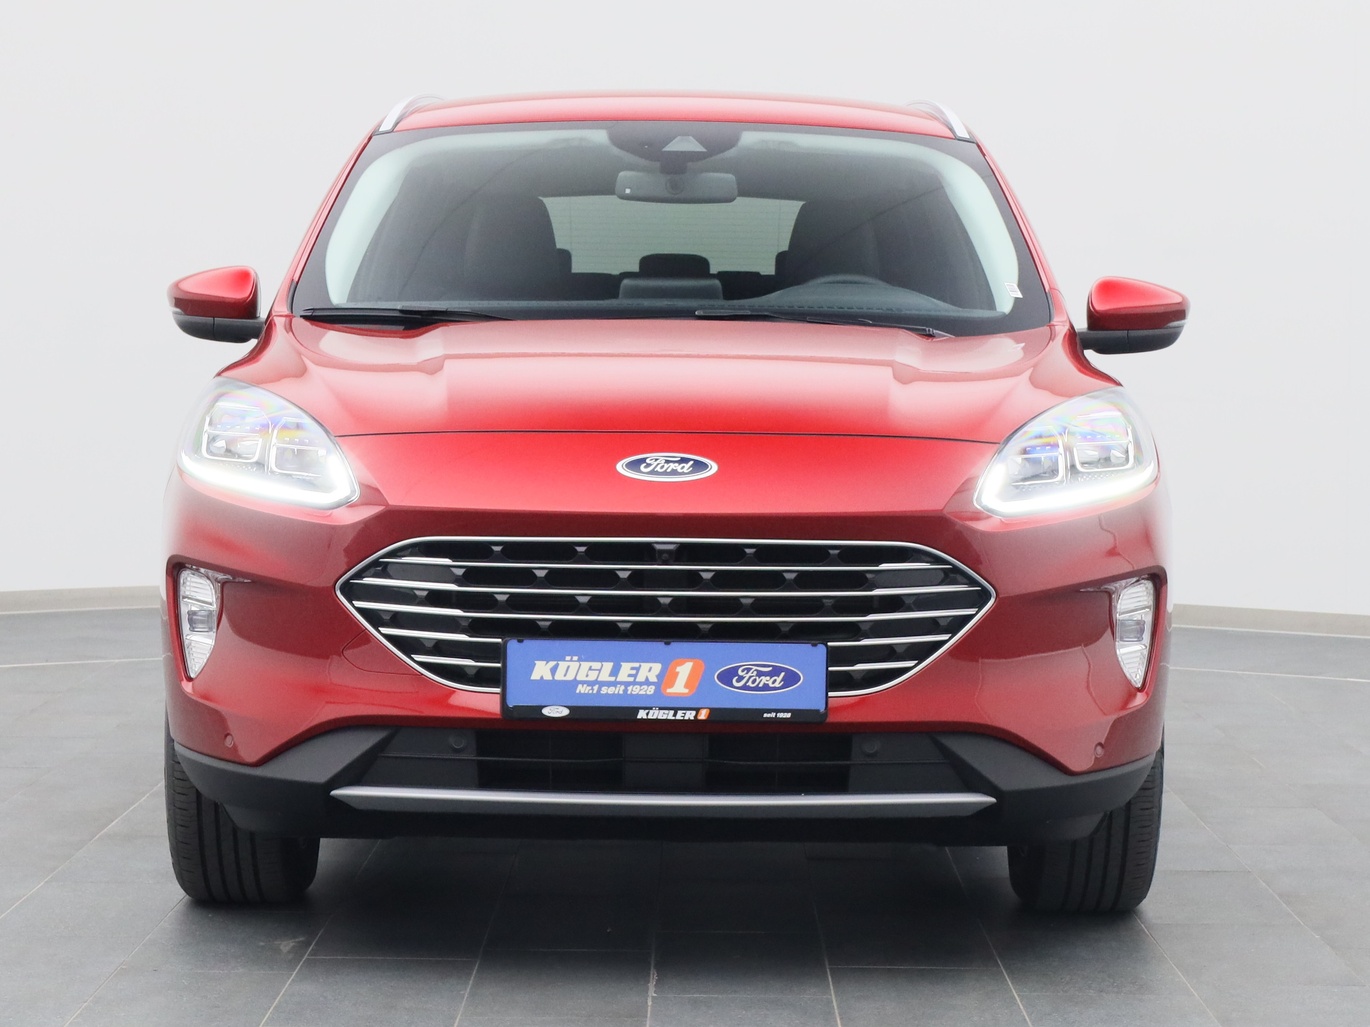 Frontansicht eines Ford Kuga Titanium X 225PS Plug-in-Hybrid Aut. in Lucid Rot 